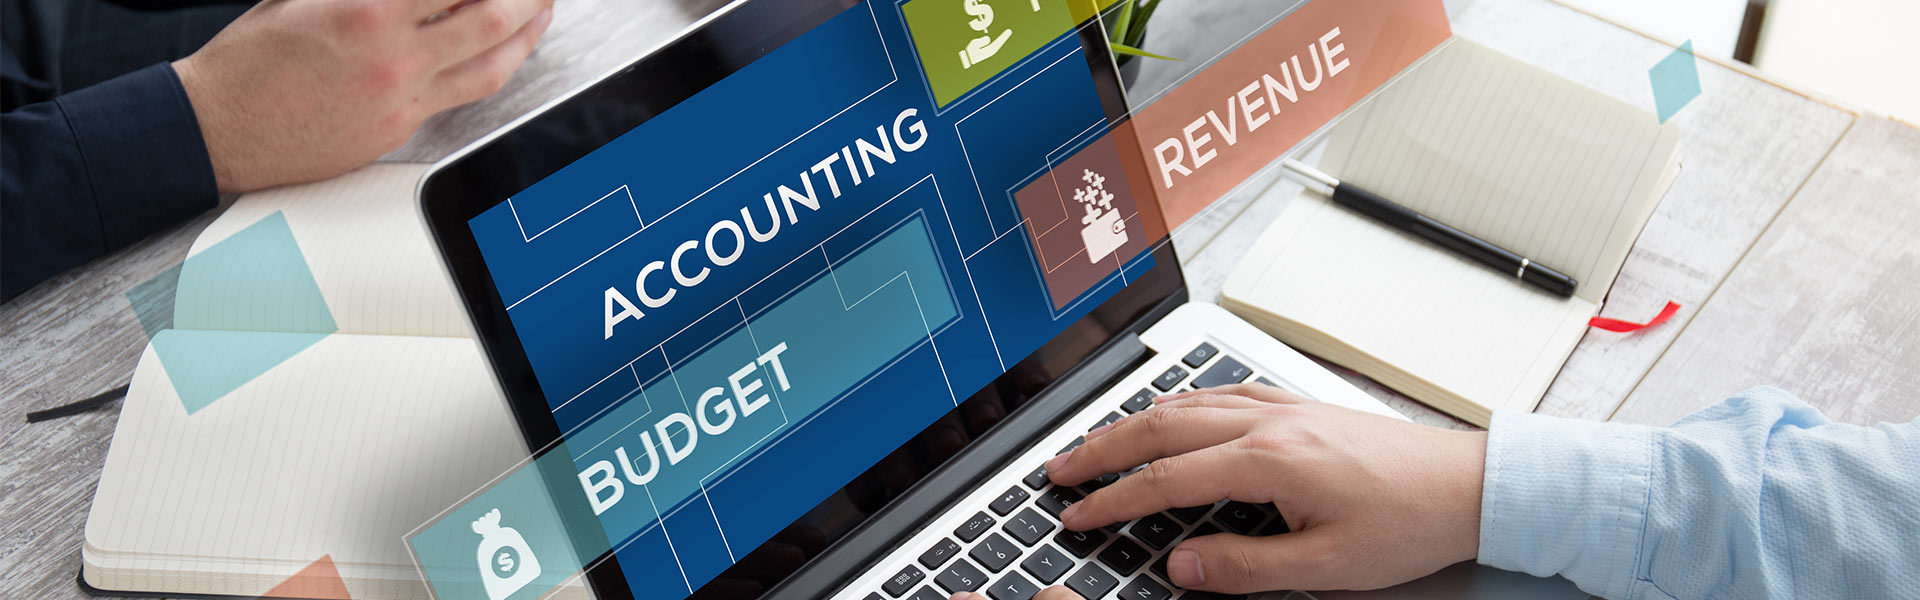 Accounting concept graphic on laptop